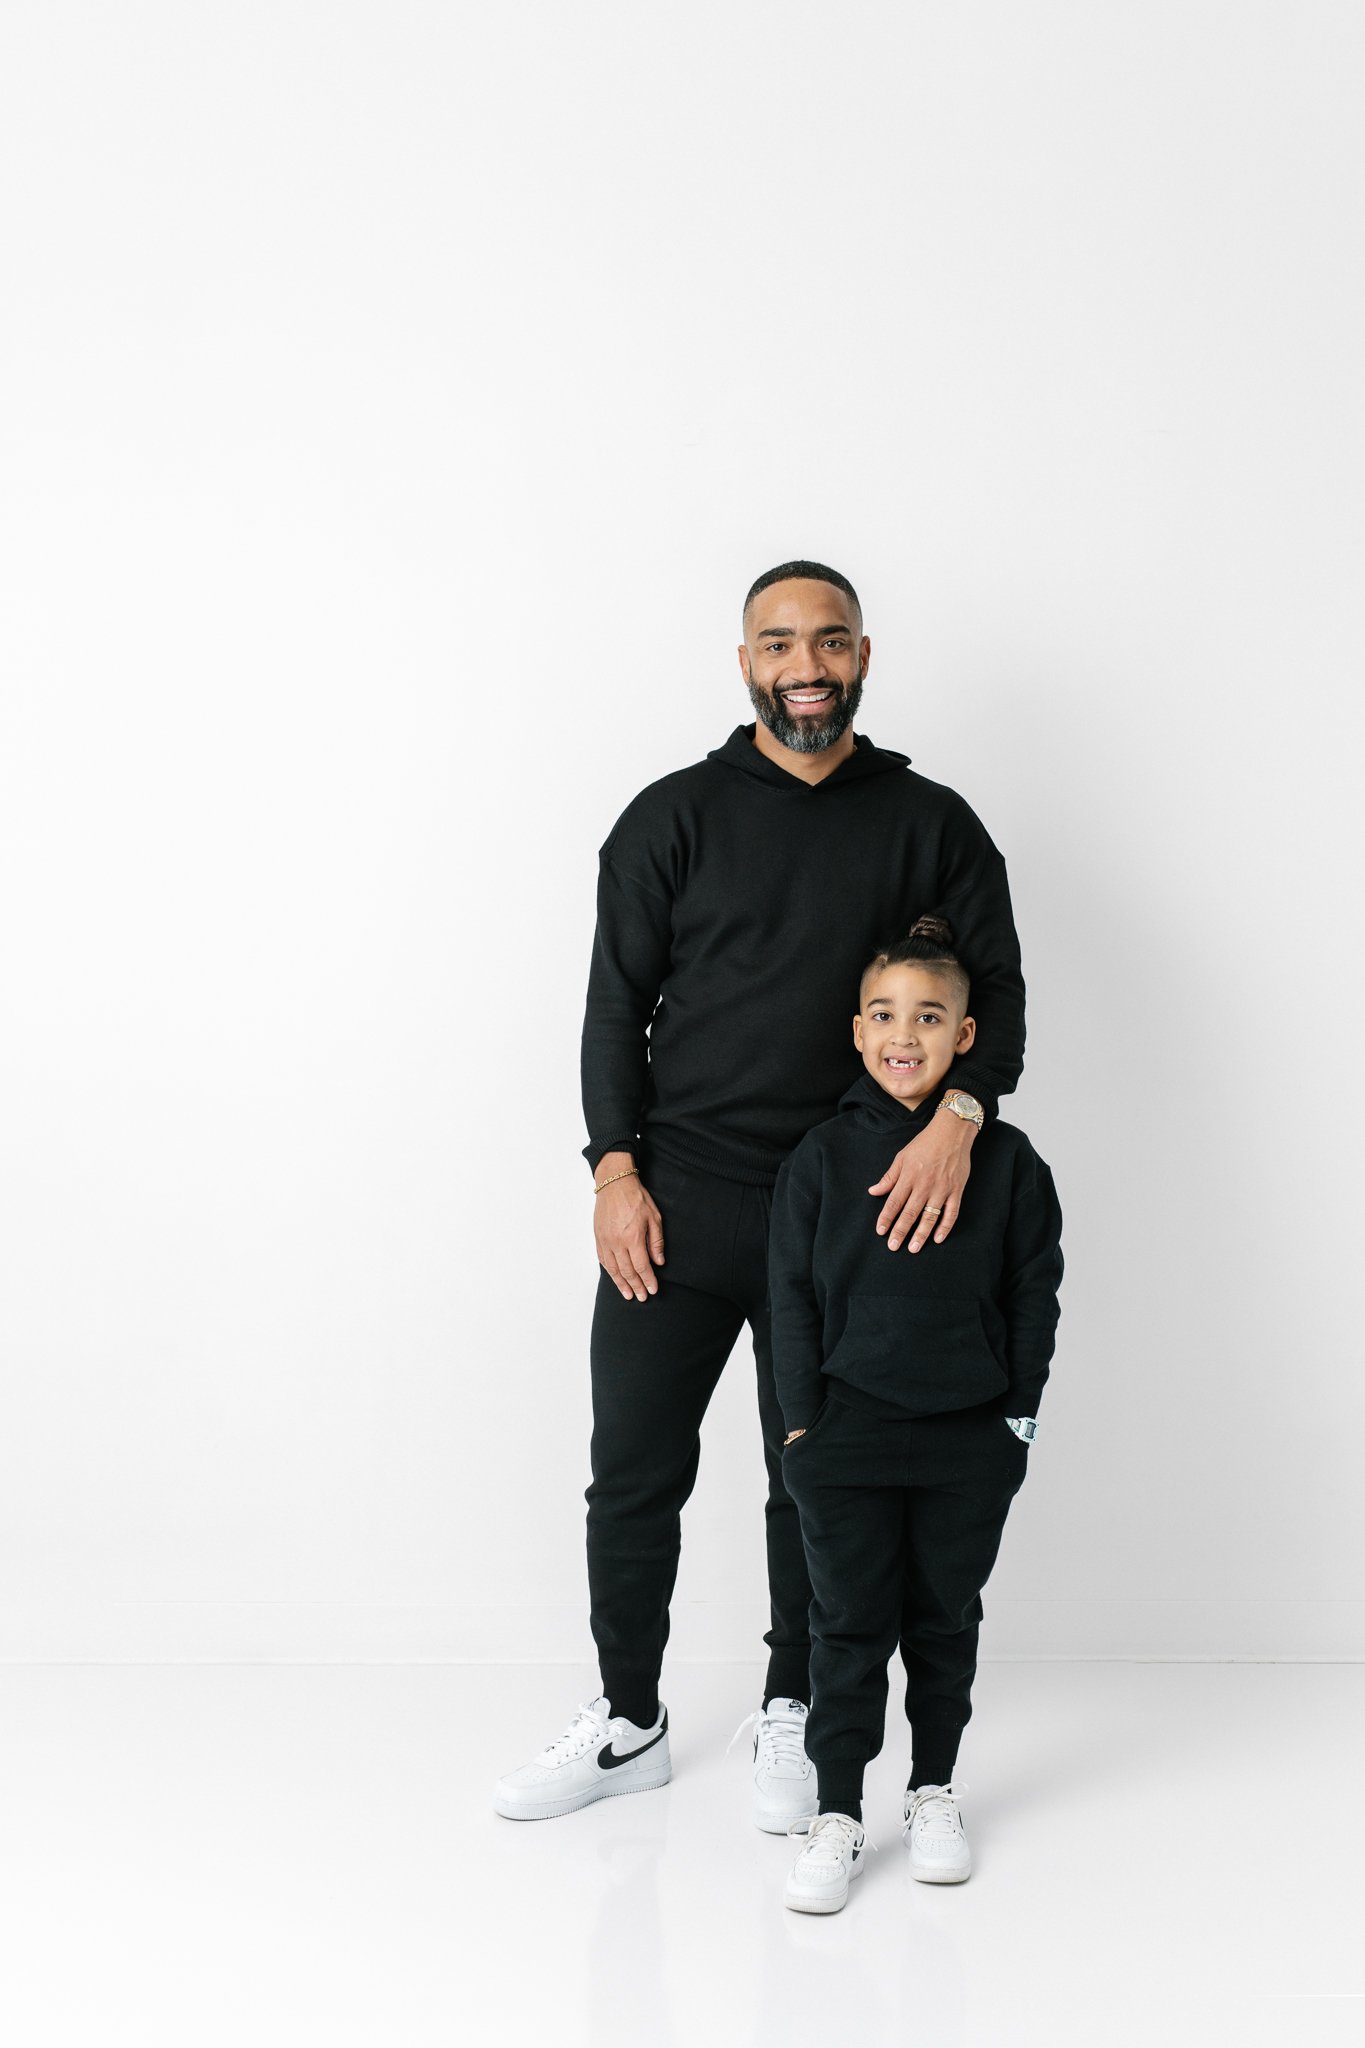  Modern studio portrait of a father and his son in matching outfits by Nicole Hawkins Photography. modern style #NicoleHawkinsPhotograaphy #NicoleHawkinsFamilies #Modernfamilypictures #studioportraits #matchingfamilyoutfits #NJphotographer 